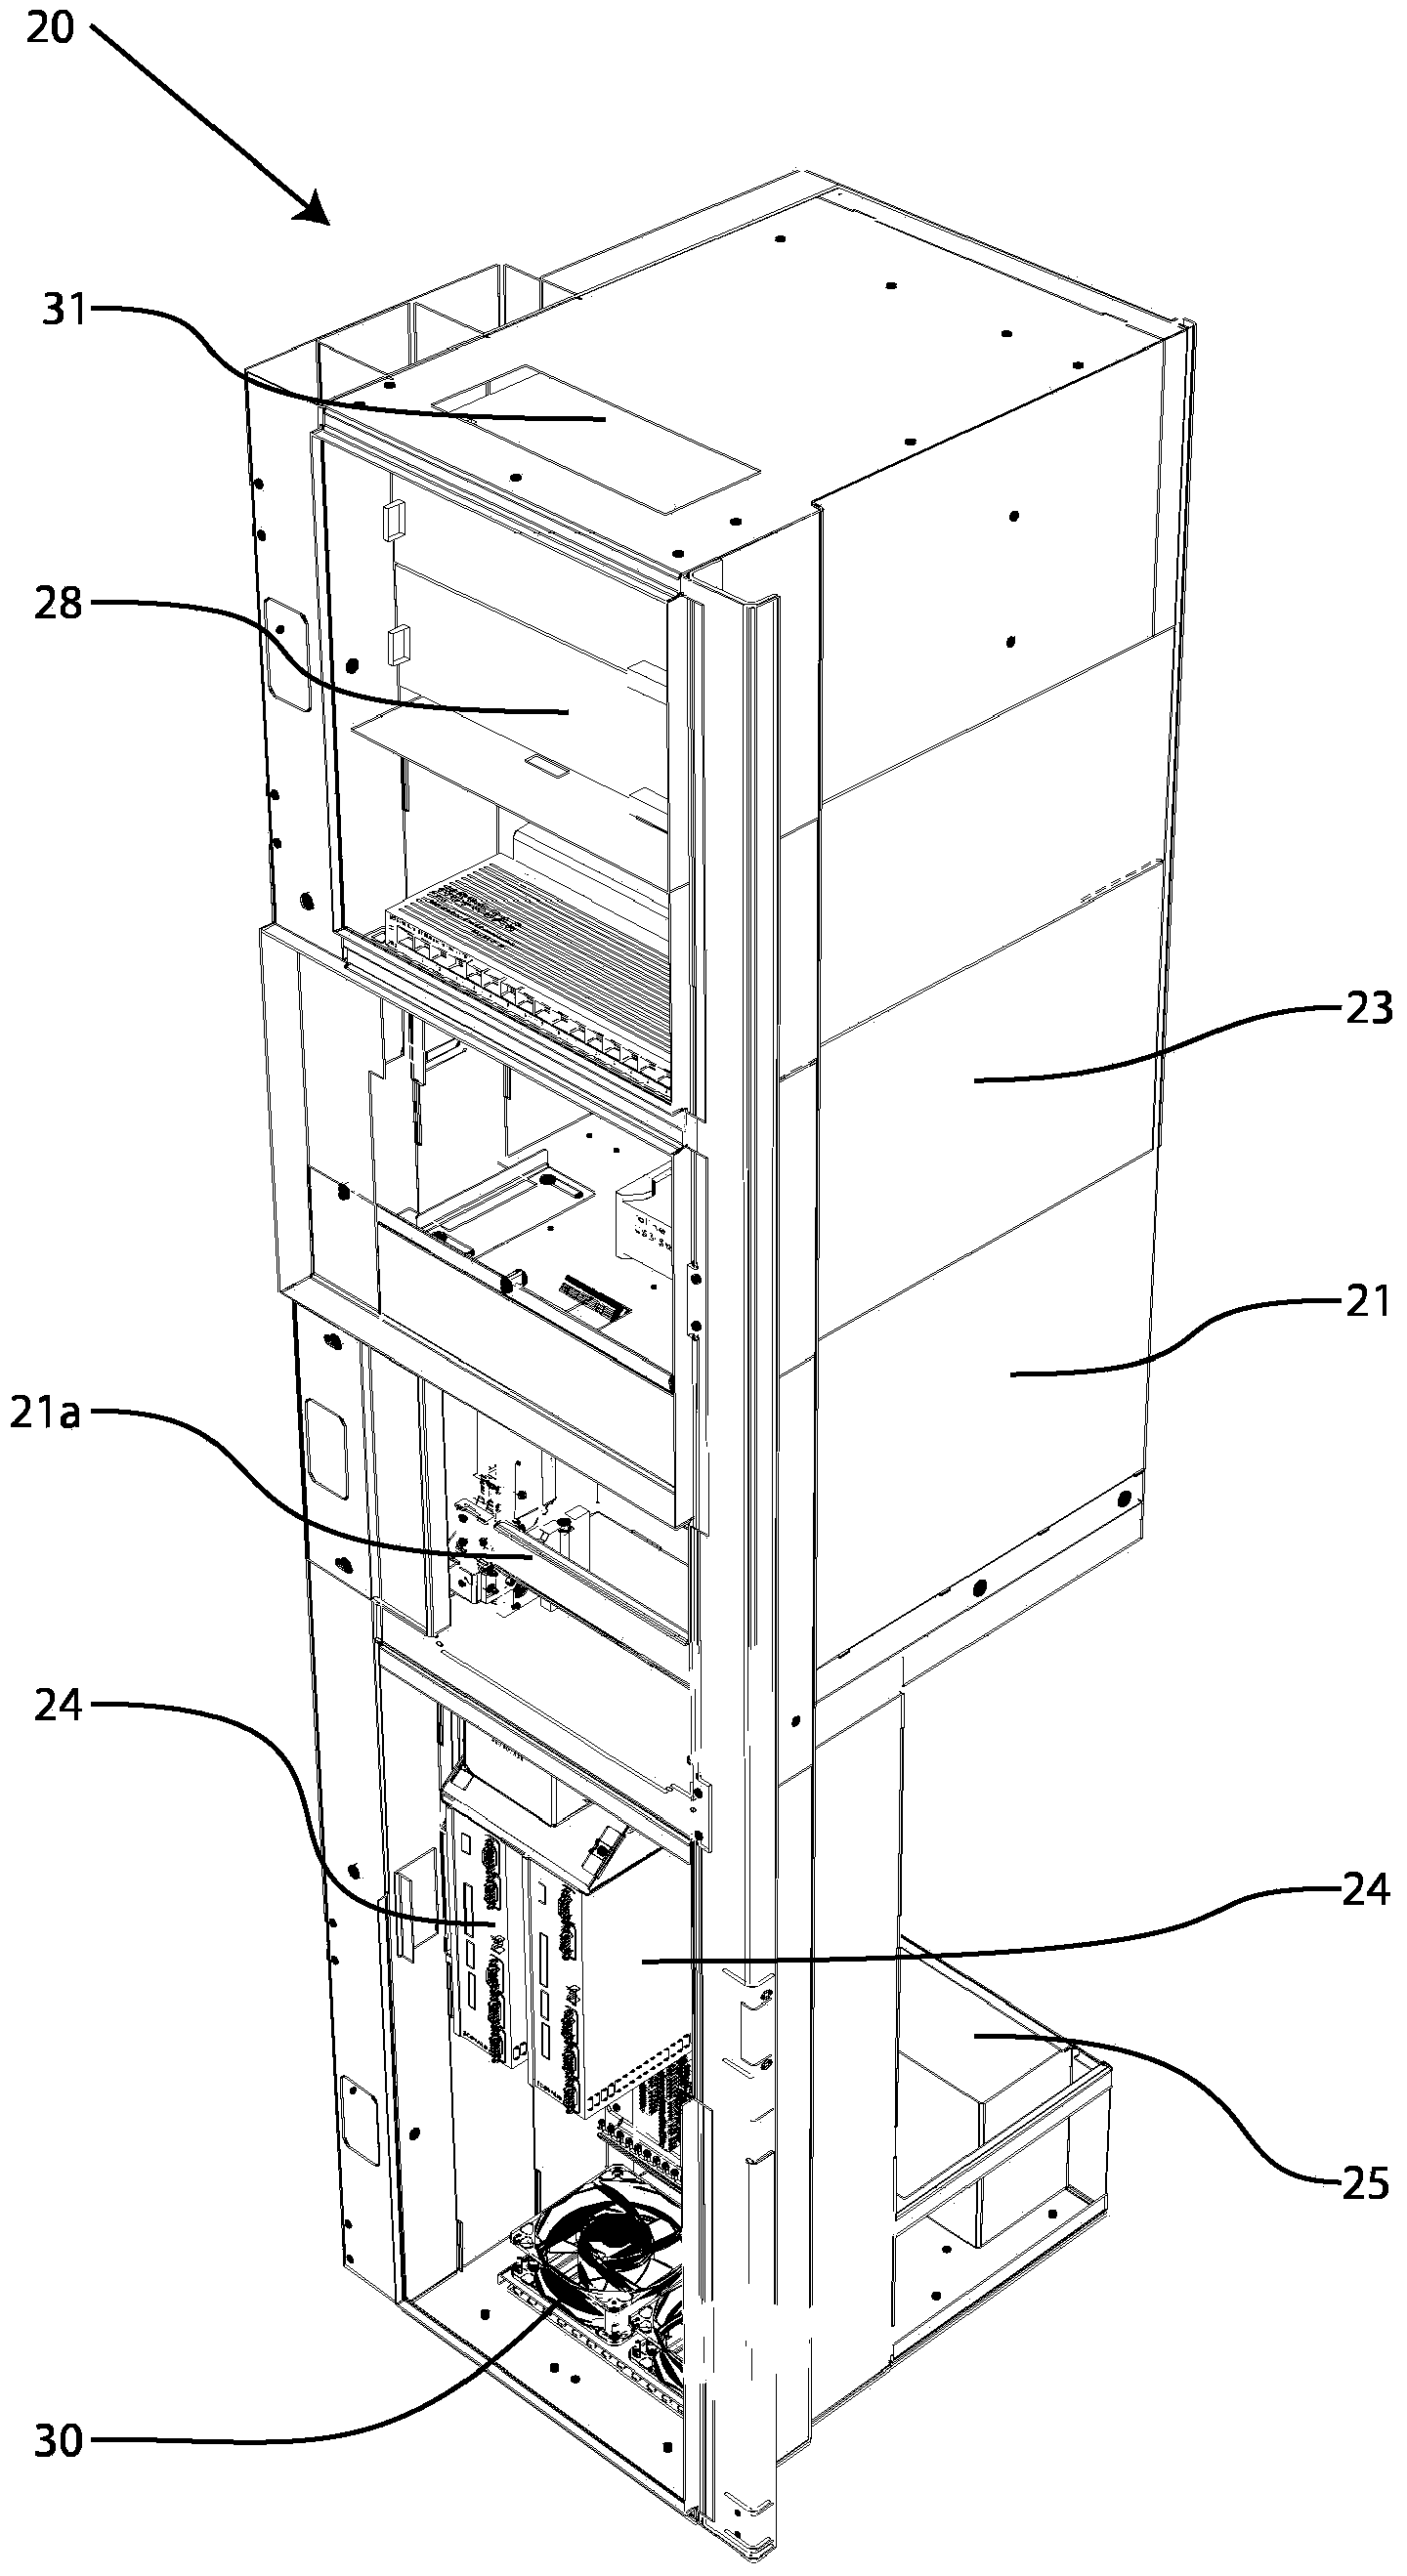 Pharmacy picking device comprising a universal supply-and-control module